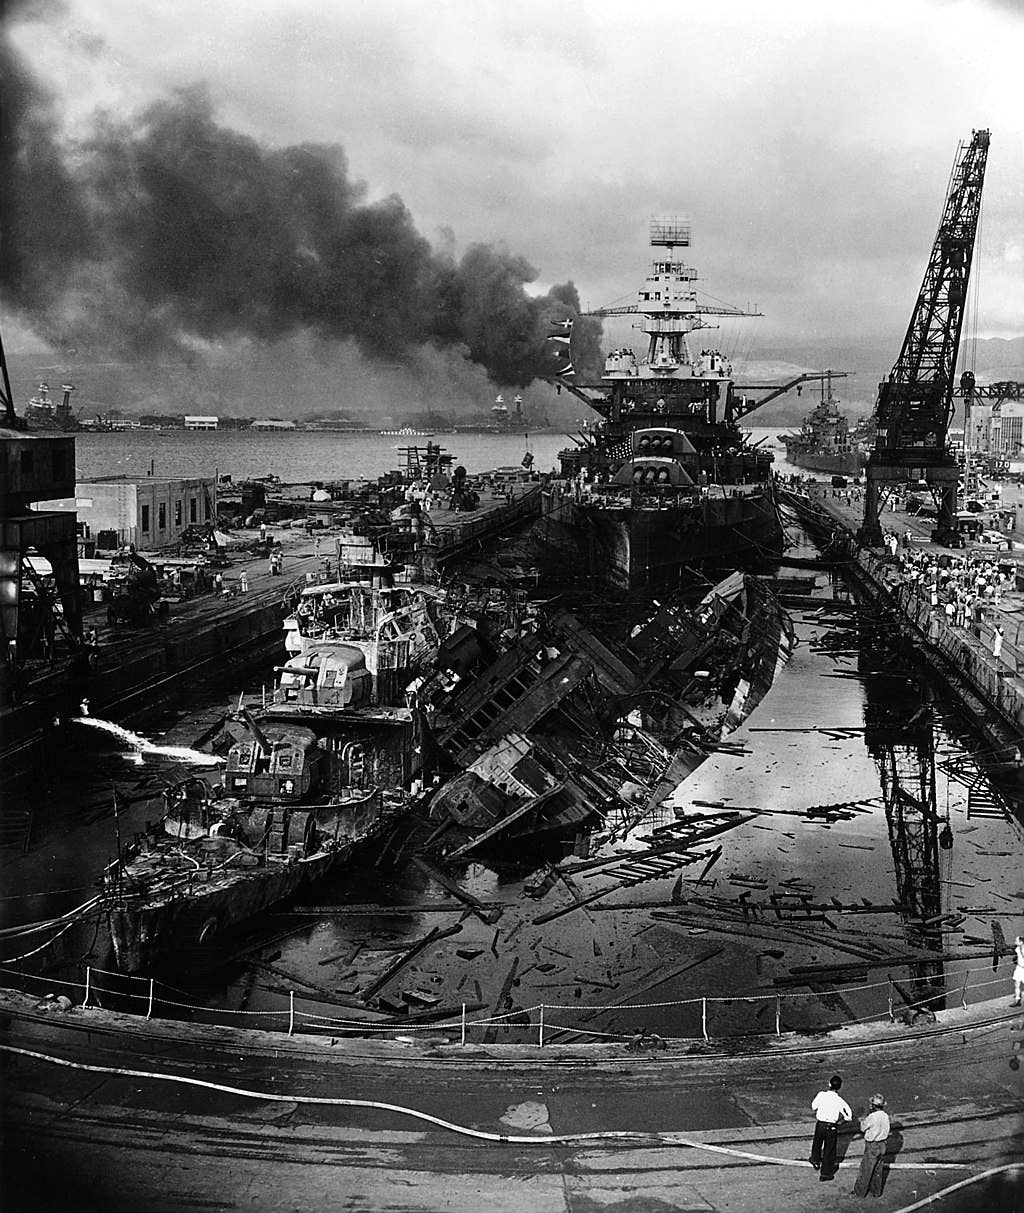 message-editor%2F1638896367404-1024px-uss_downes_dd-375_uss_cassin_dd-372_and_uss_pennsylvania_bb-38_in_dry_dock_no._1_at_the_pearl_harbor_naval_shipyard_7_december_1941_306533.jpg